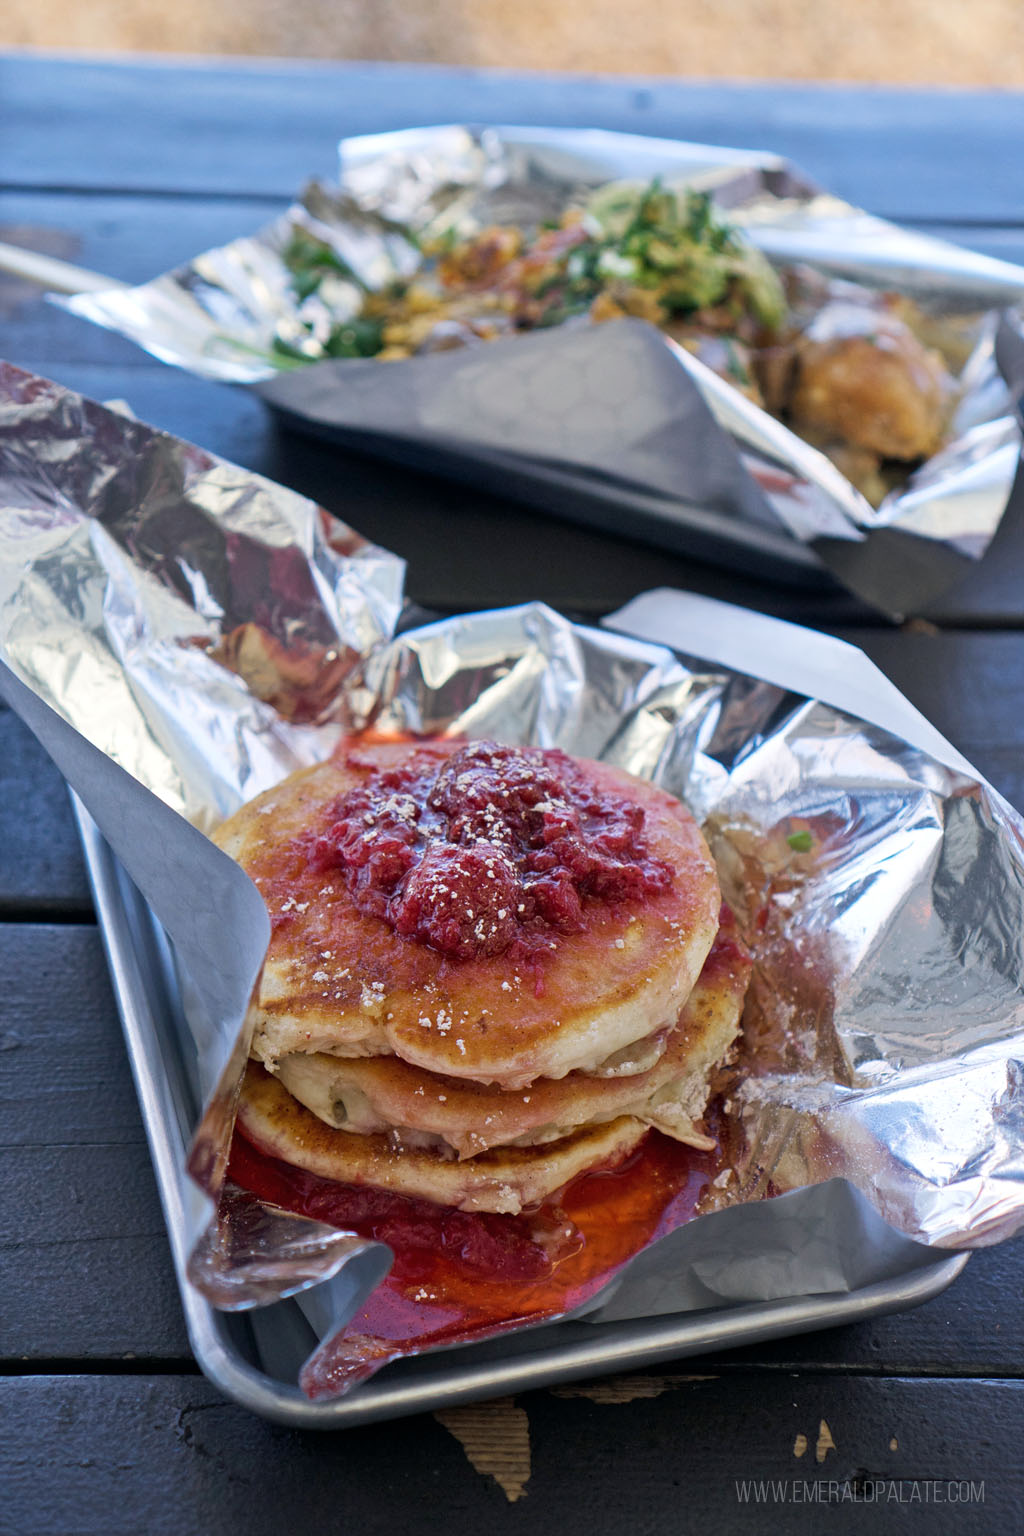 pancakes topped with berries in a takeout container with tinfoil